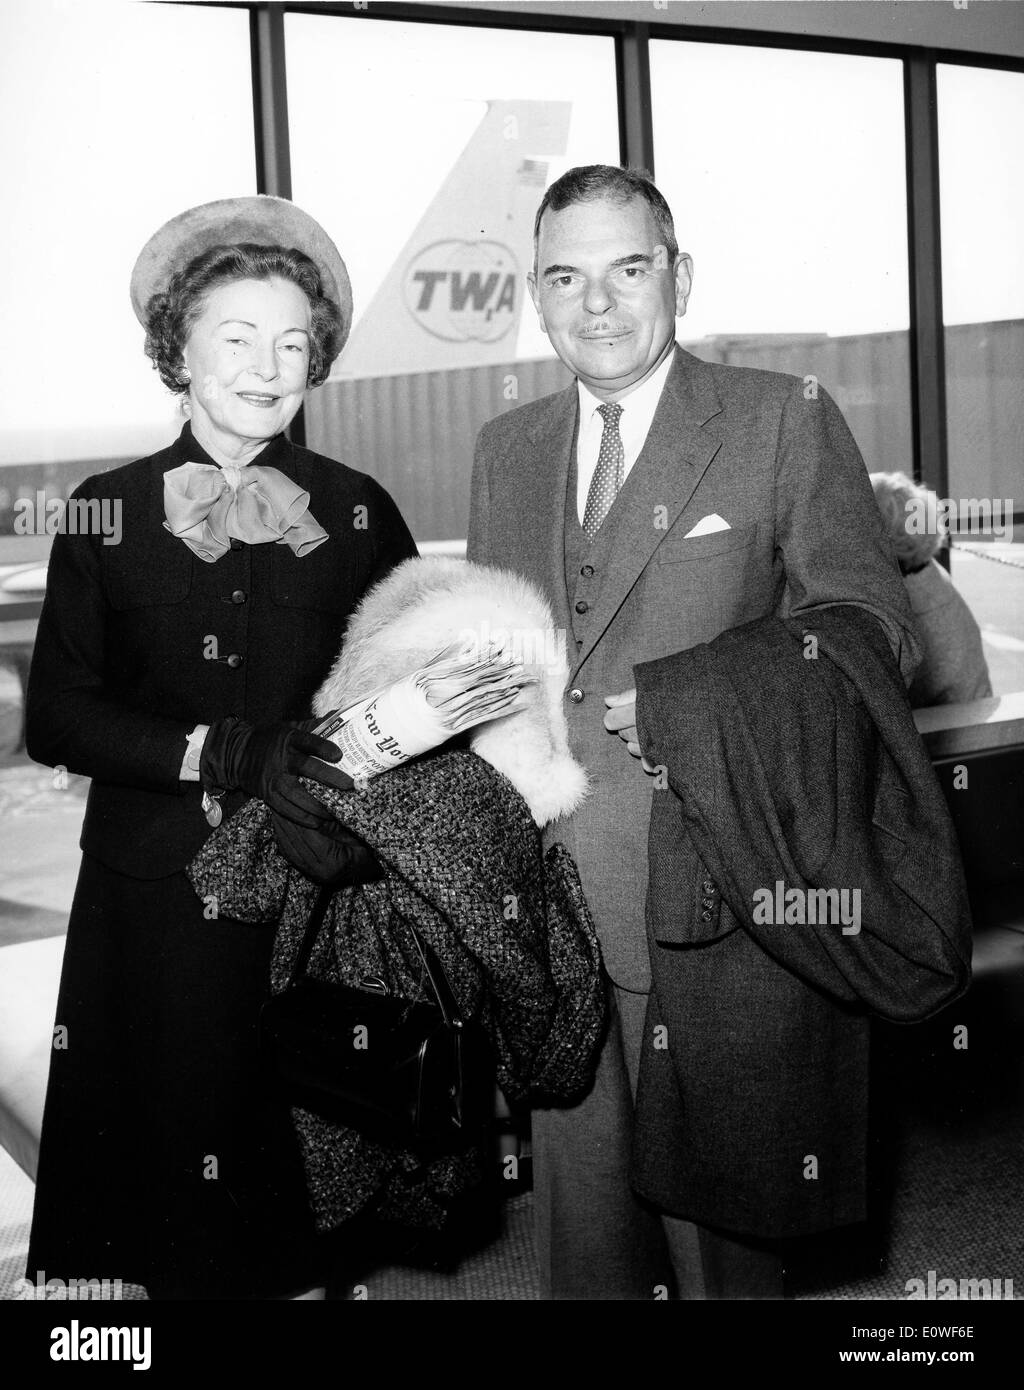 Governor Thomas E. Dewey and his wife Frances at the airport Stock Photo